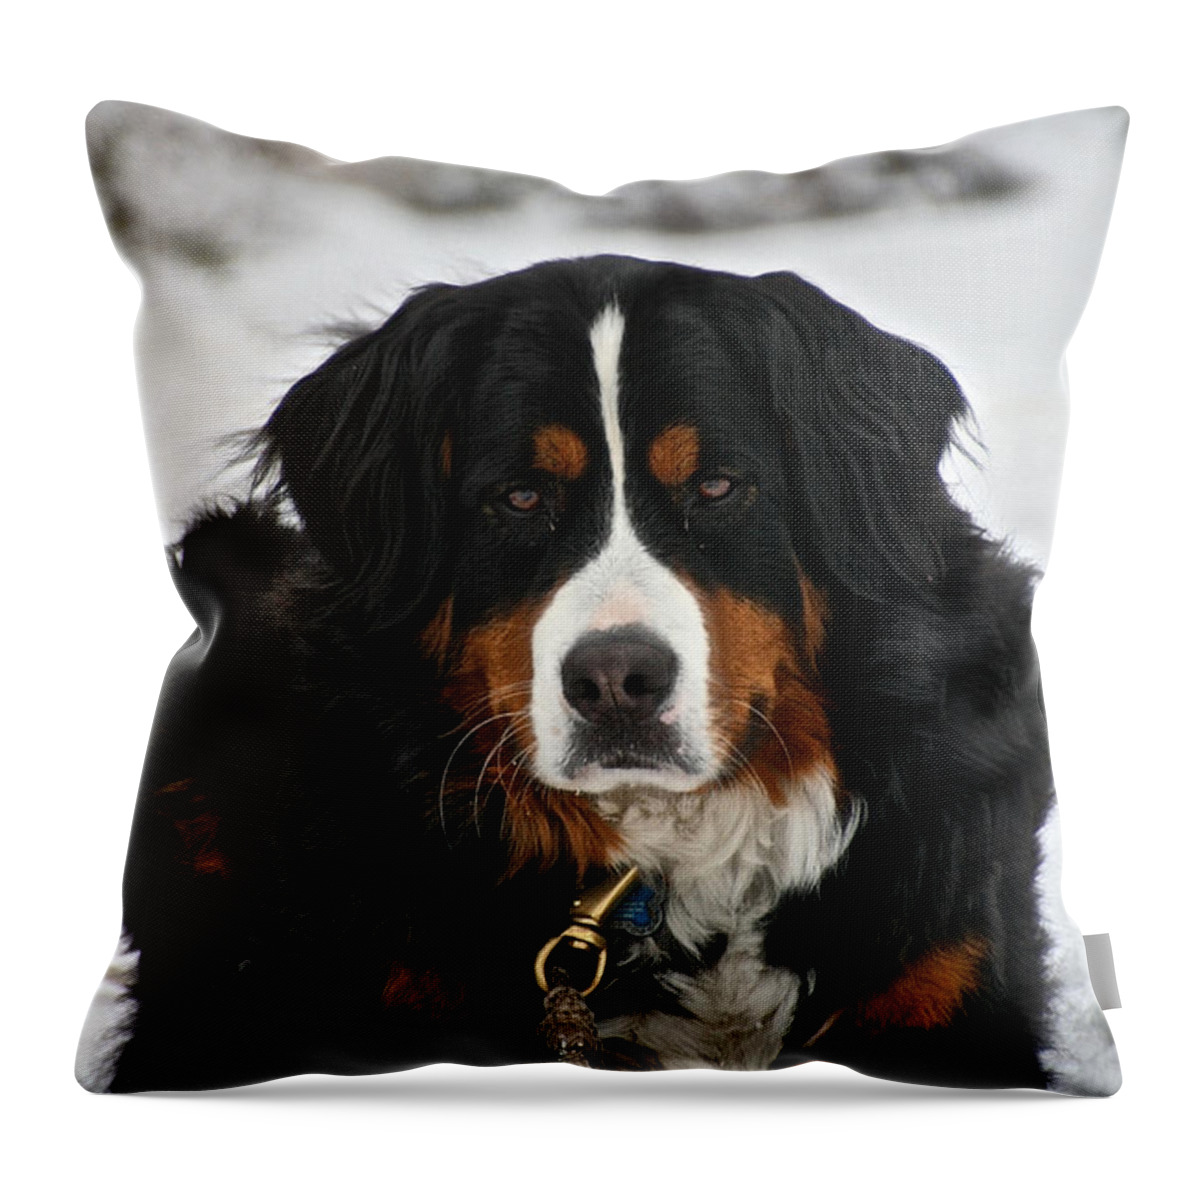 Outdoors Throw Pillow featuring the photograph Bernese Mountain Dog by Susan Herber